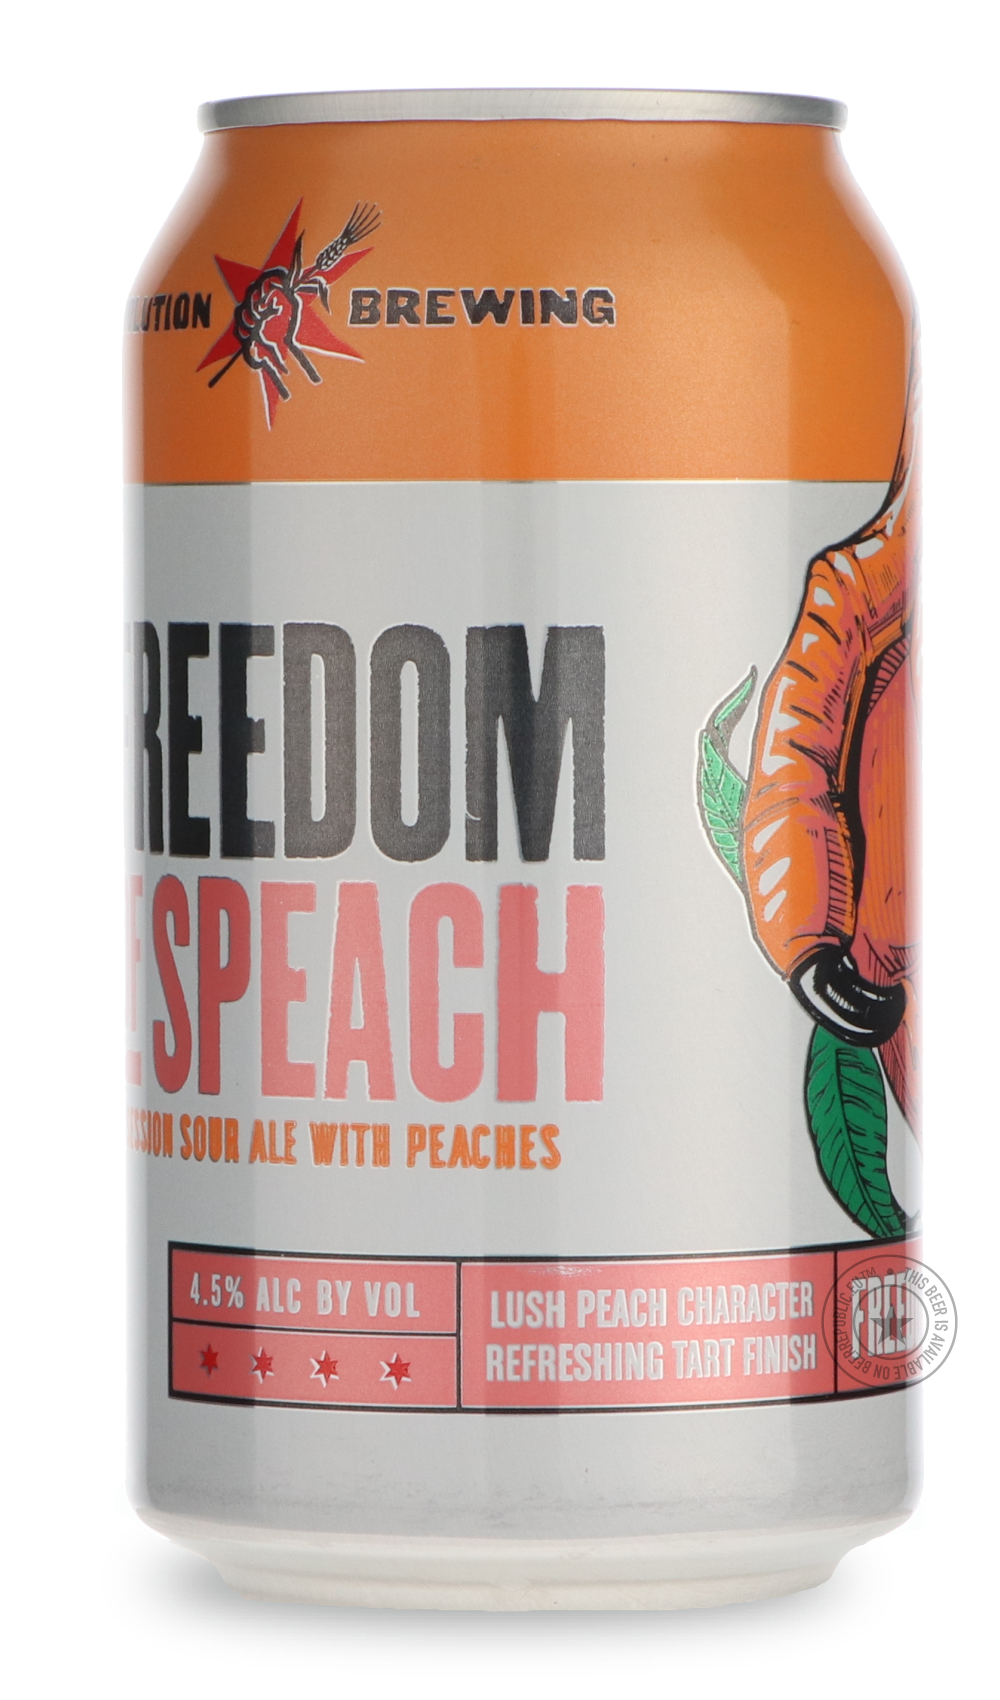 -Revolution- Freedom of Speach-Sour / Wild & Fruity- Only @ Beer Republic - The best online beer store for American & Canadian craft beer - Buy beer online from the USA and Canada - Bier online kopen - Amerikaans bier kopen - Craft beer store - Craft beer kopen - Amerikanisch bier kaufen - Bier online kaufen - Acheter biere online - IPA - Stout - Porter - New England IPA - Hazy IPA - Imperial Stout - Barrel Aged - Barrel Aged Imperial Stout - Brown - Dark beer - Blond - Blonde - Pilsner - Lager - Wheat - We